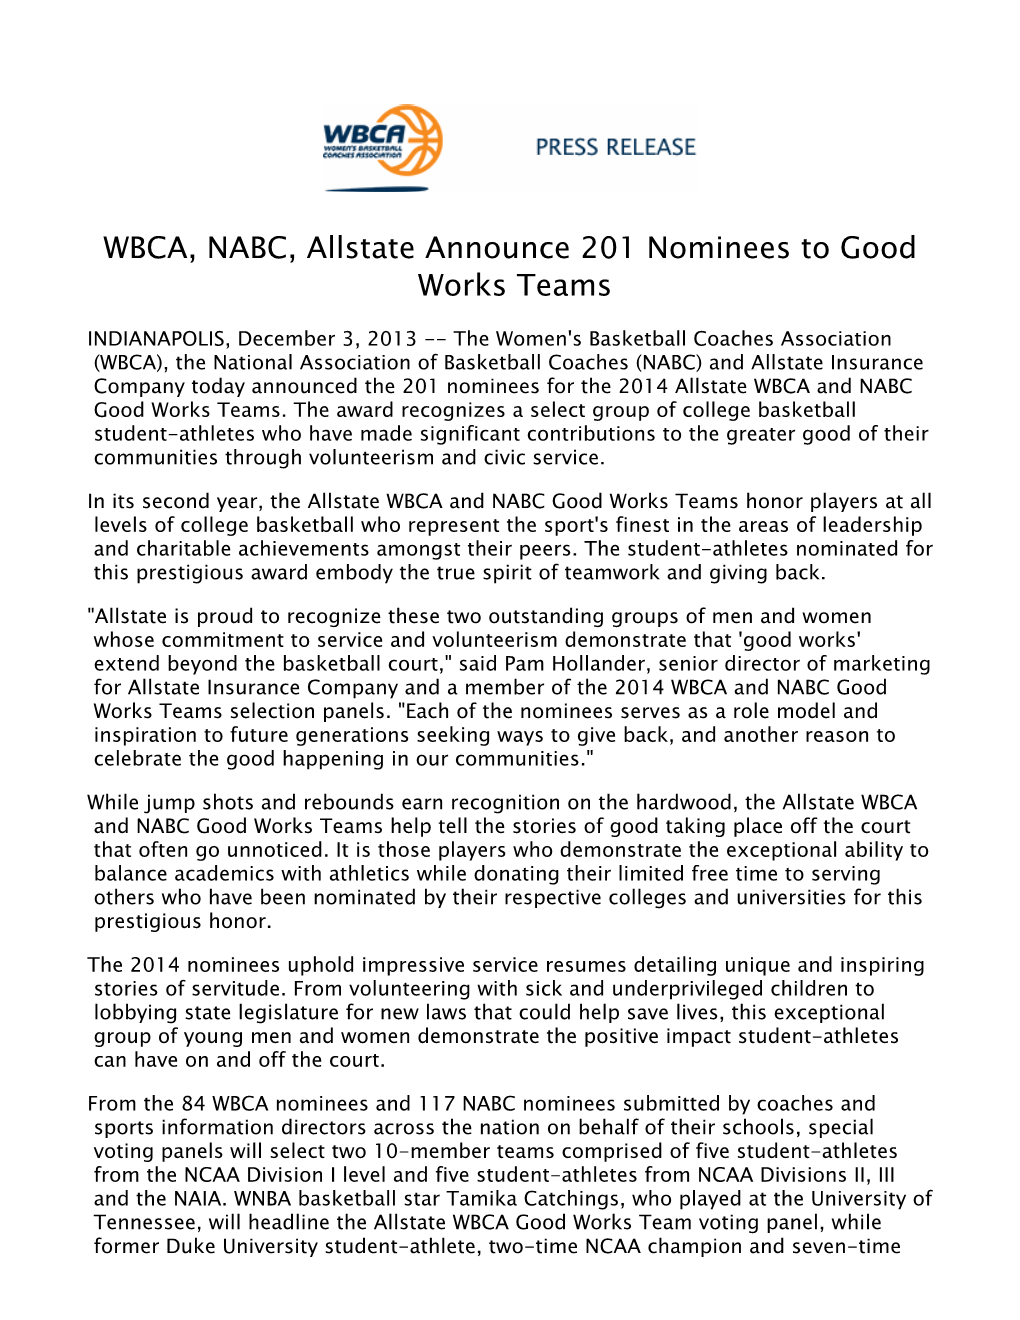 WBCA, NABC, Allstate Announce 201 Nominees to Good Works Teams